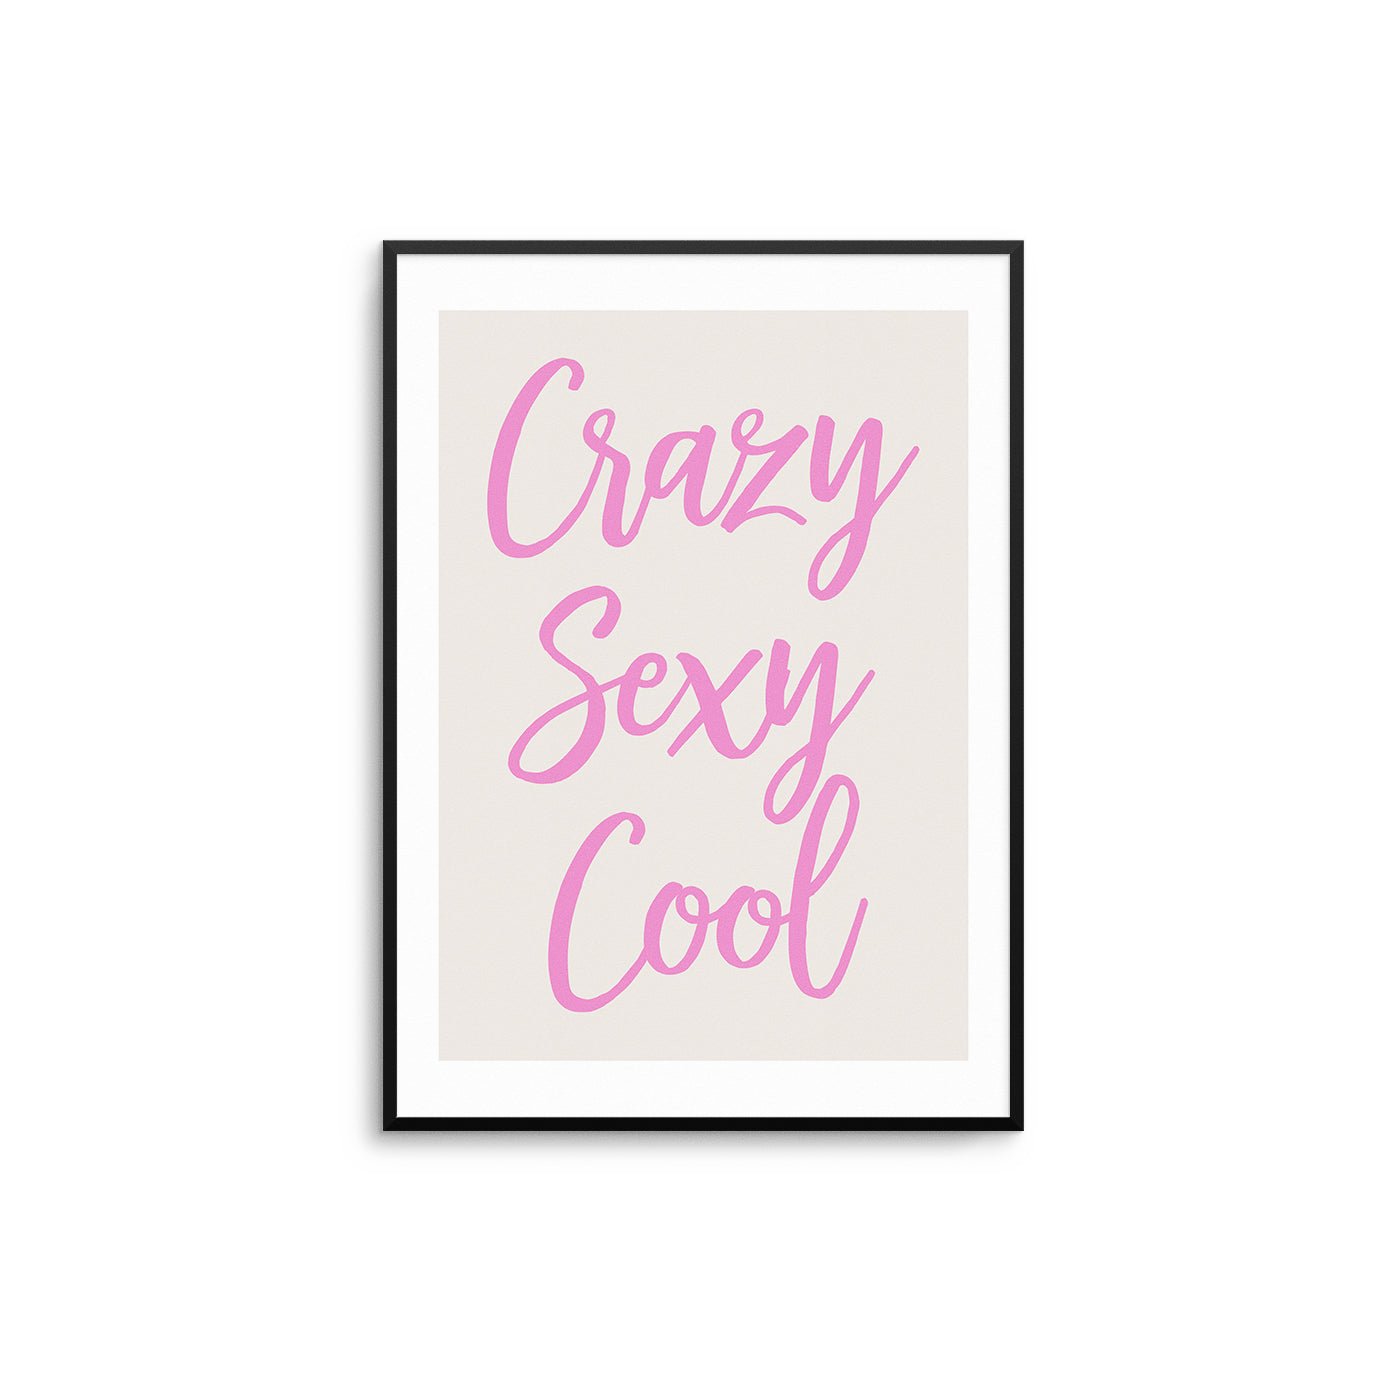 Crazy Sexy Cool - D'Luxe Prints